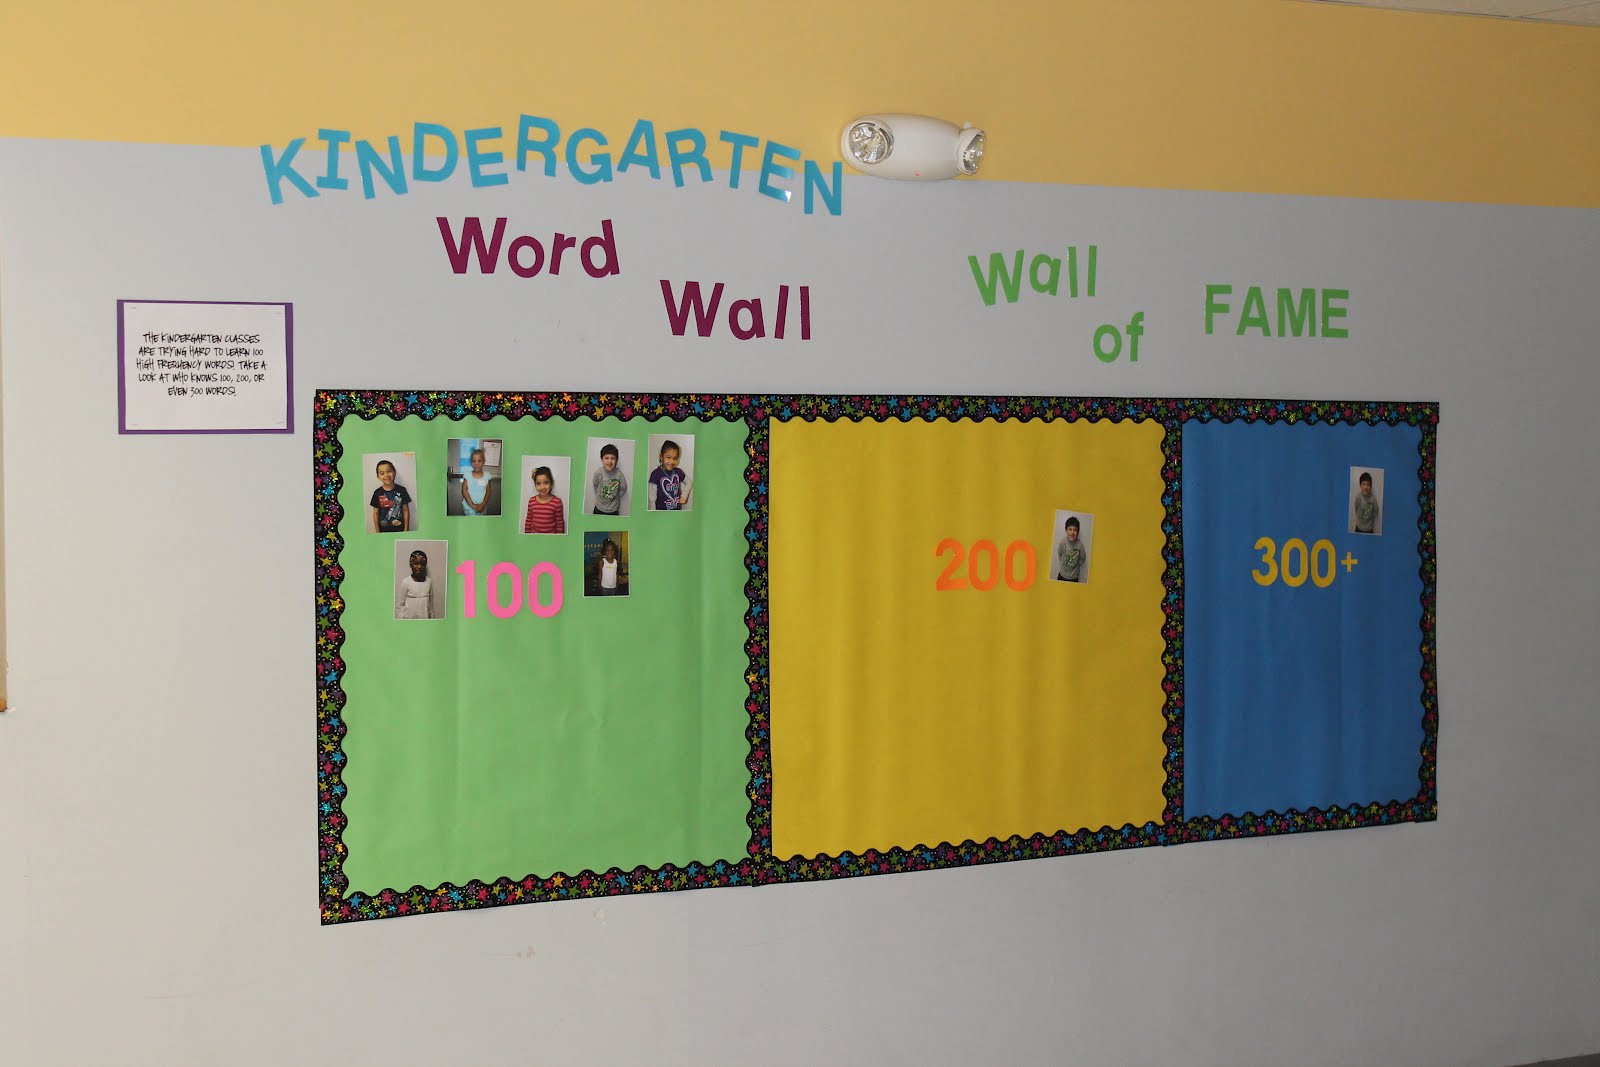 Wordwall 8a. Word Wall. Wall of Fame. Wordwall 7. Wall of Fame in English class.